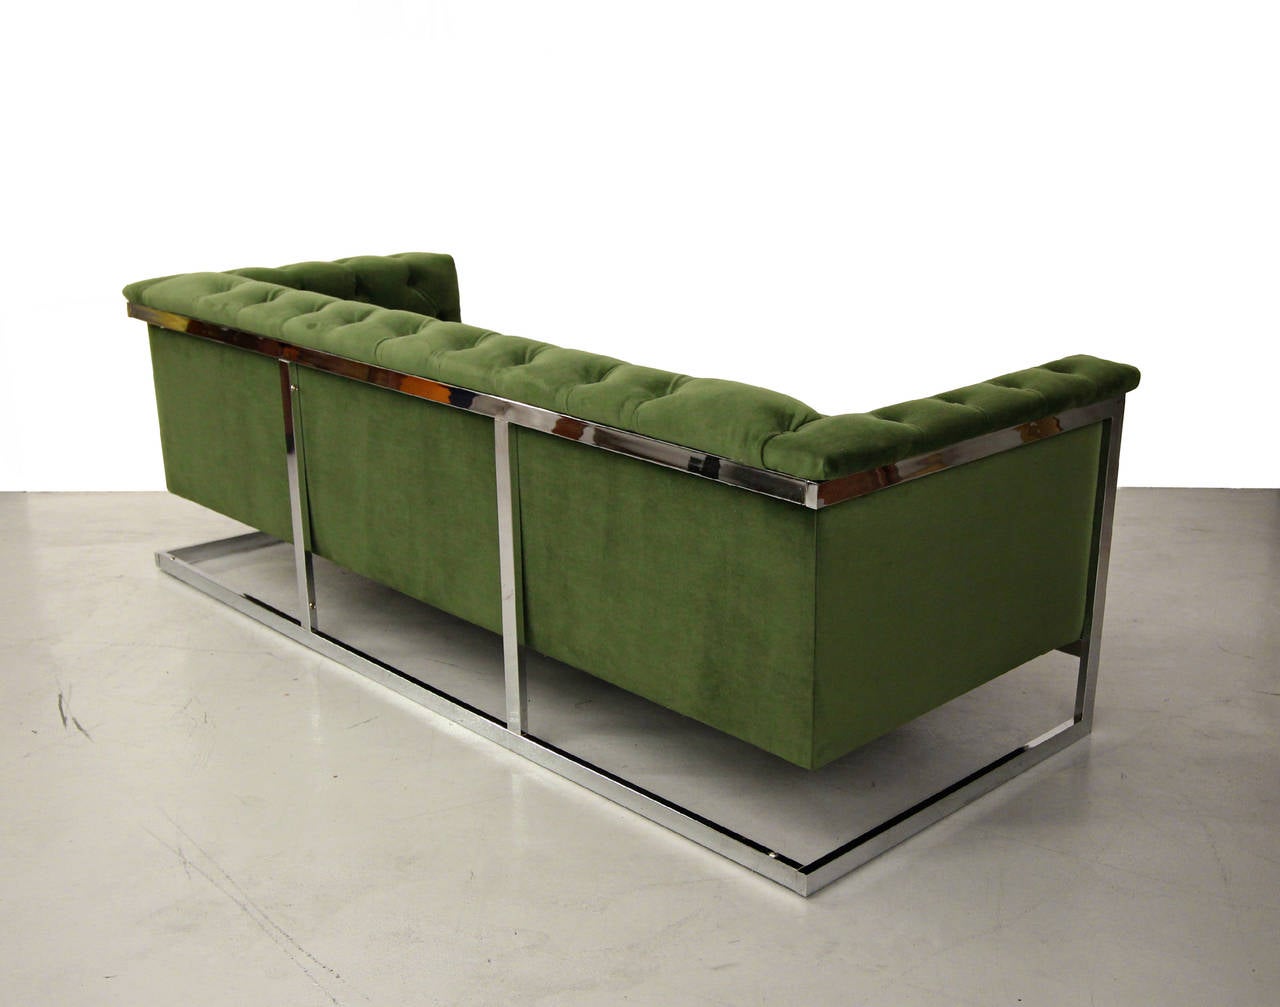 Rare and unique, Chrome Cantilevered Sofa, similar in styles by Milo Baughman, DIA, etc. however unmarked.  Recently upholstered in a deep very soft, deep green cotton based fabric.